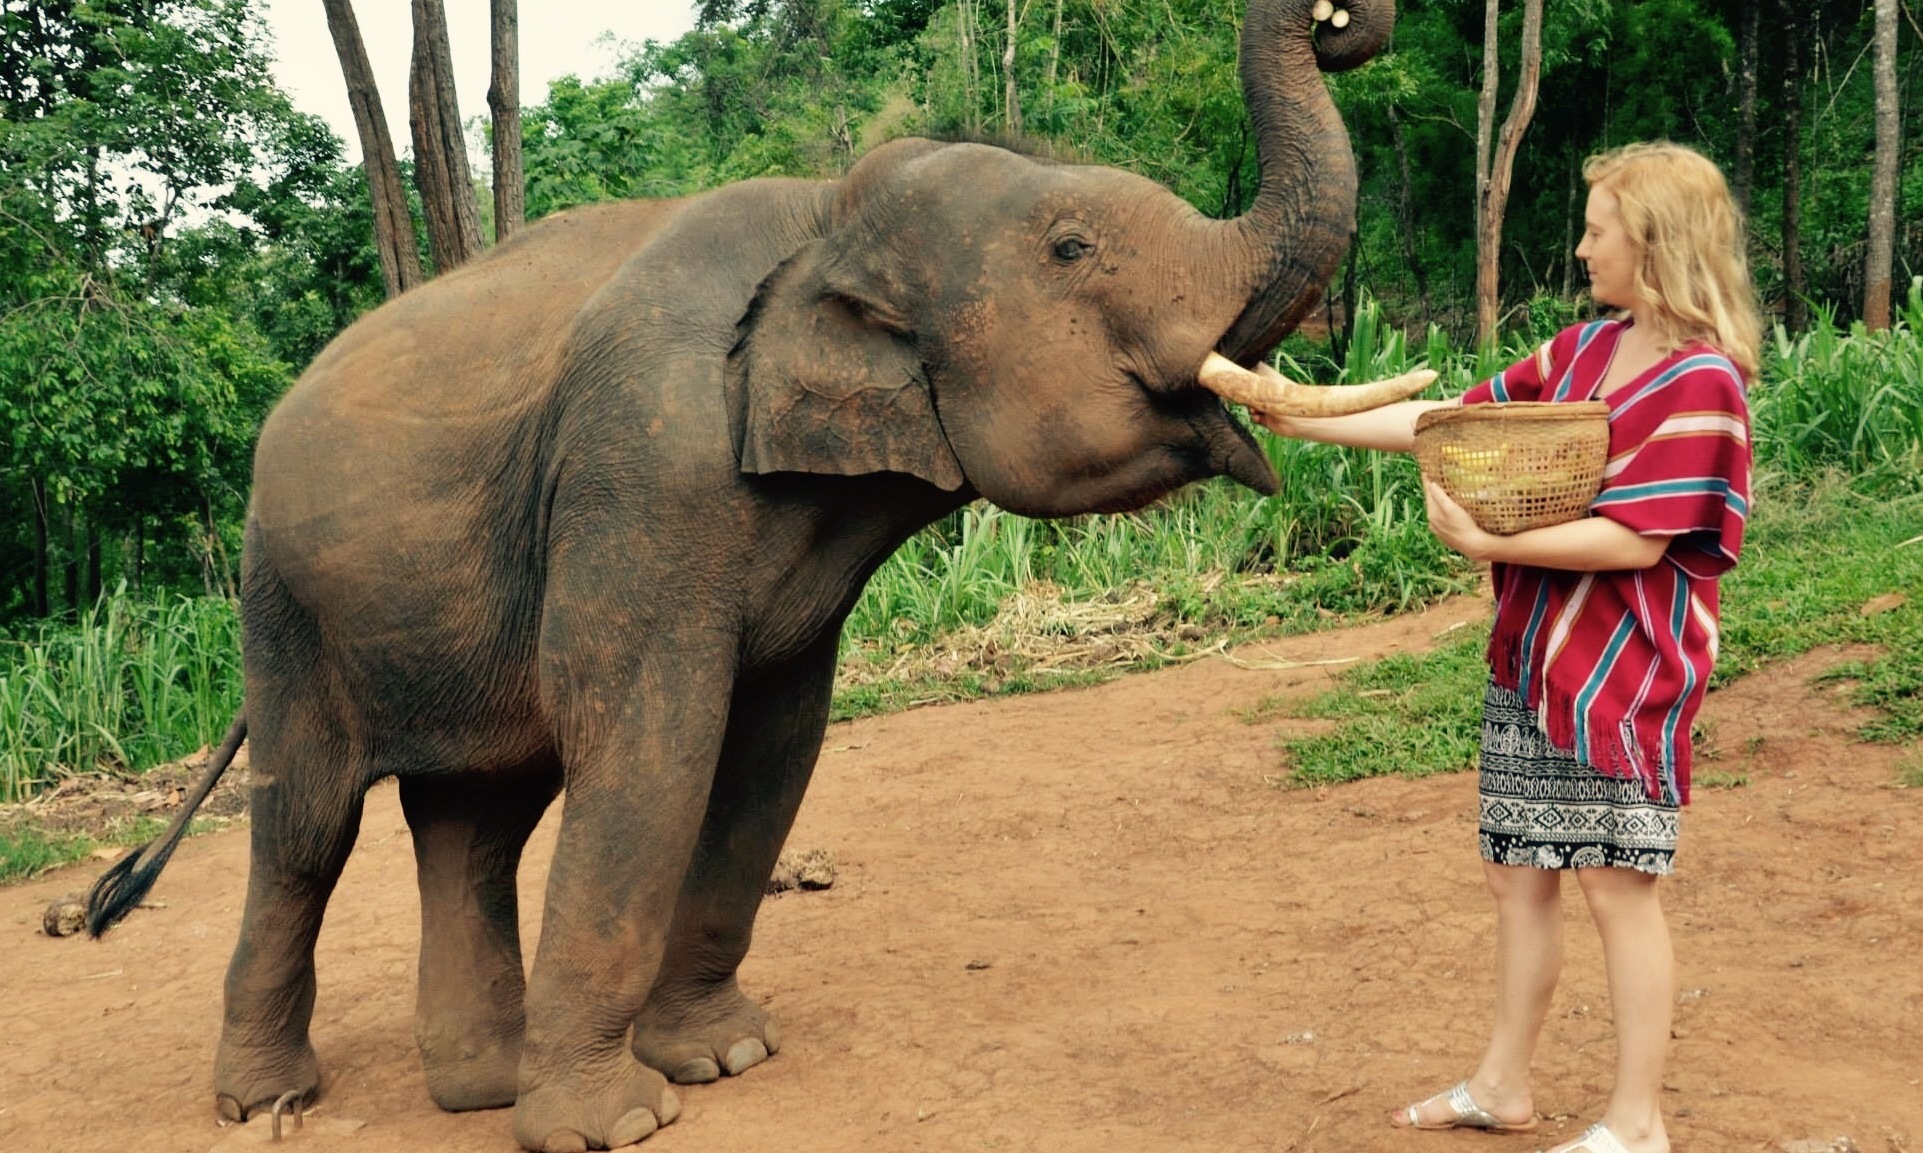 Helping the Elephants in Cambodia